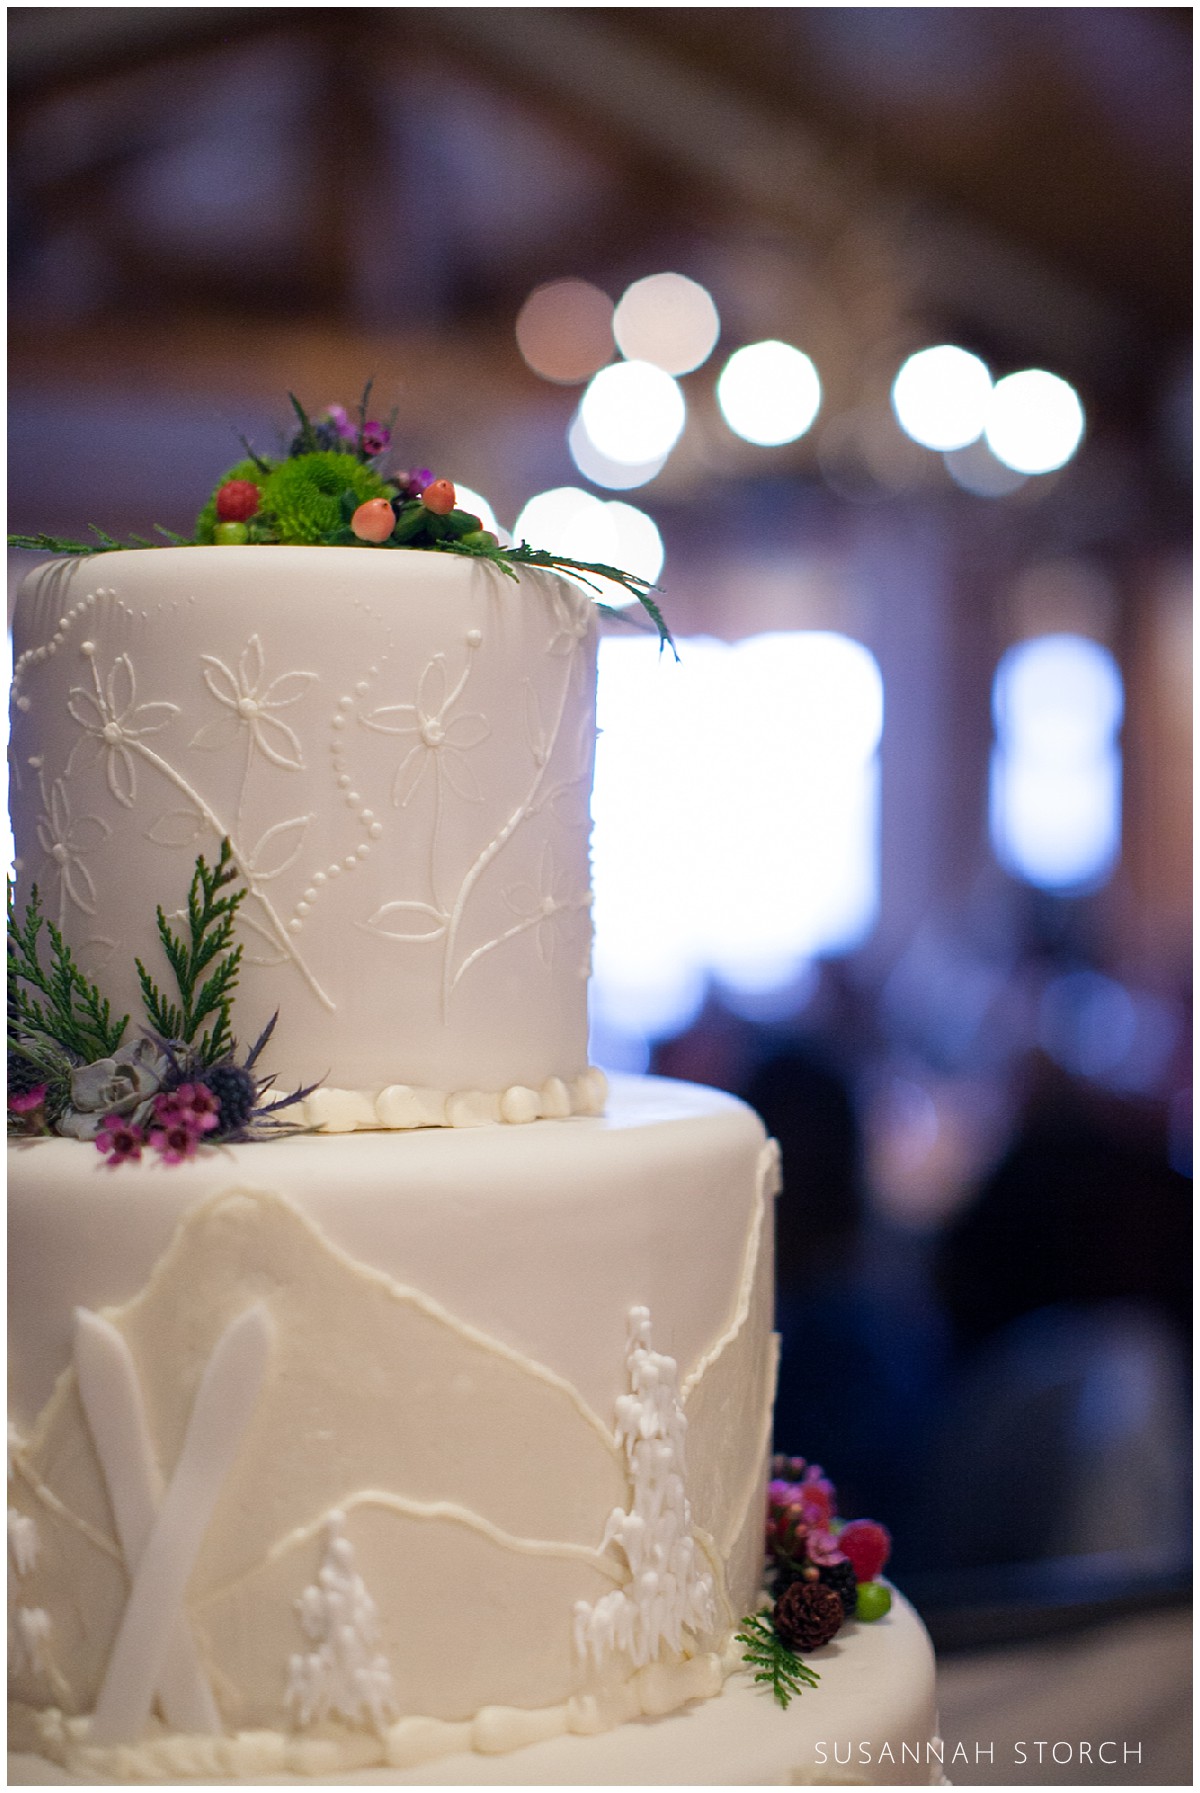 image of a wedding cake with skis and mountains